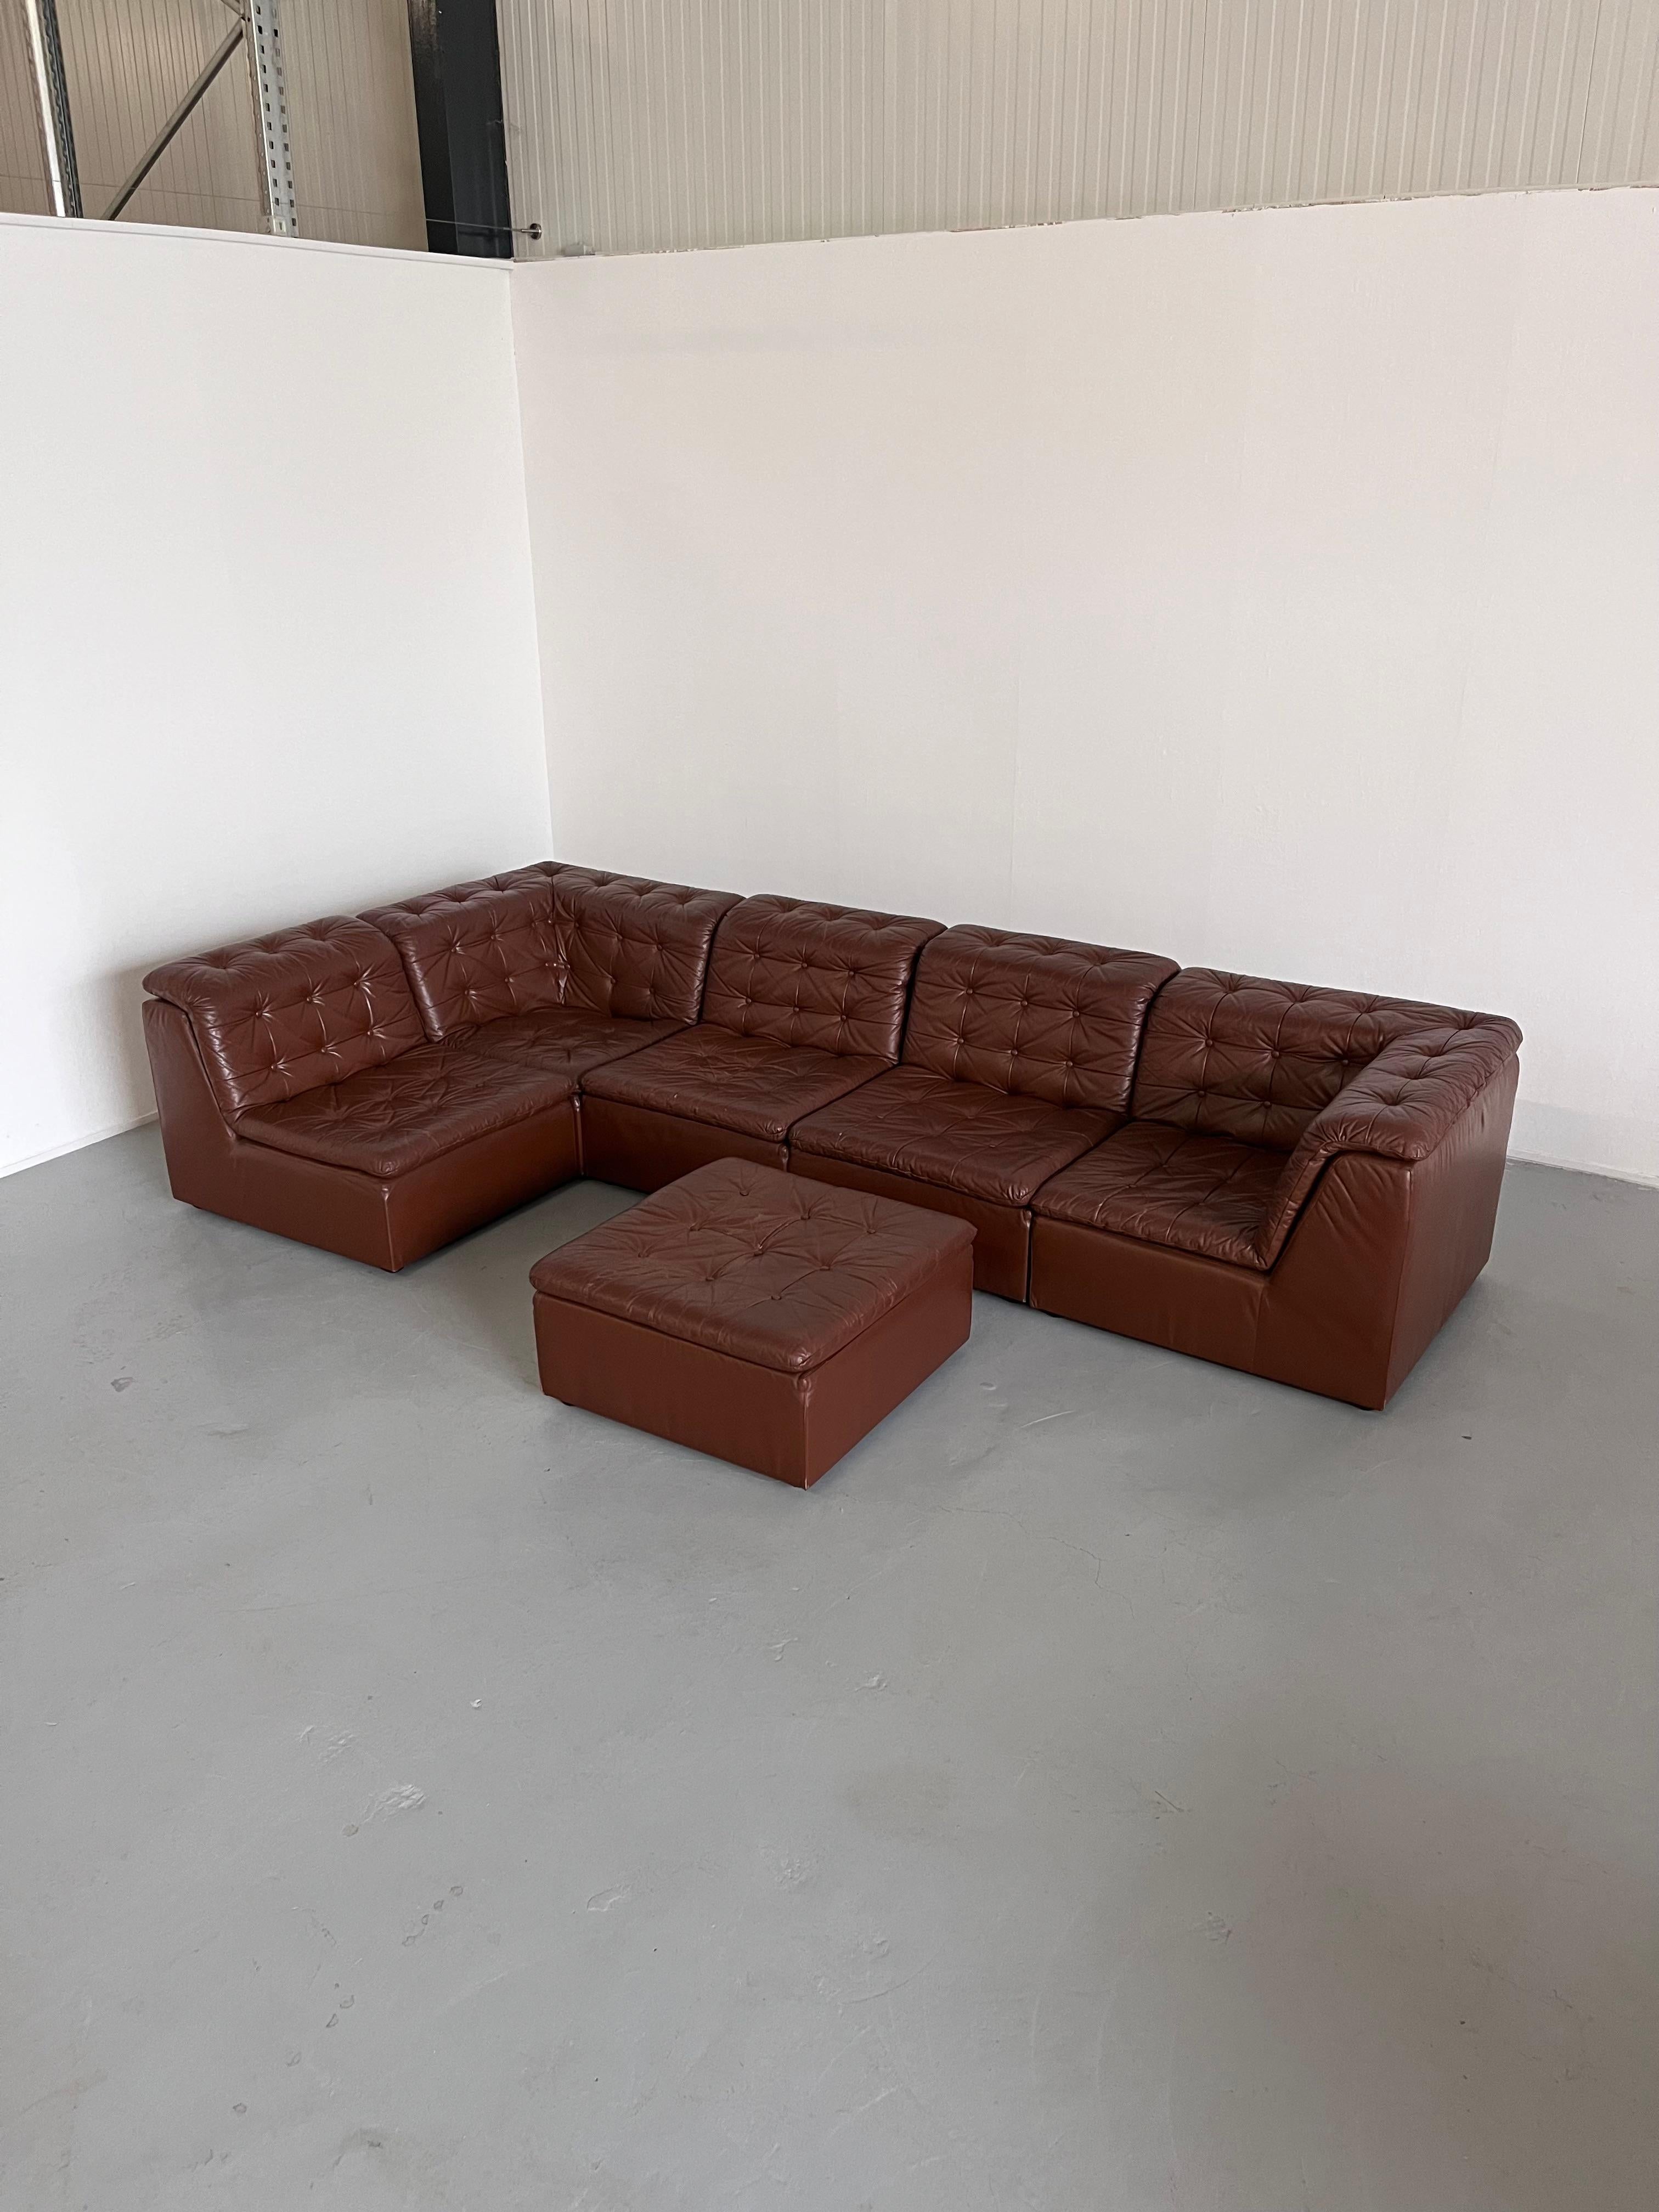 Vintage Patchwork Cognac Leather Six-Part Modular Sofa by Laauser, 1970s Germany For Sale 1